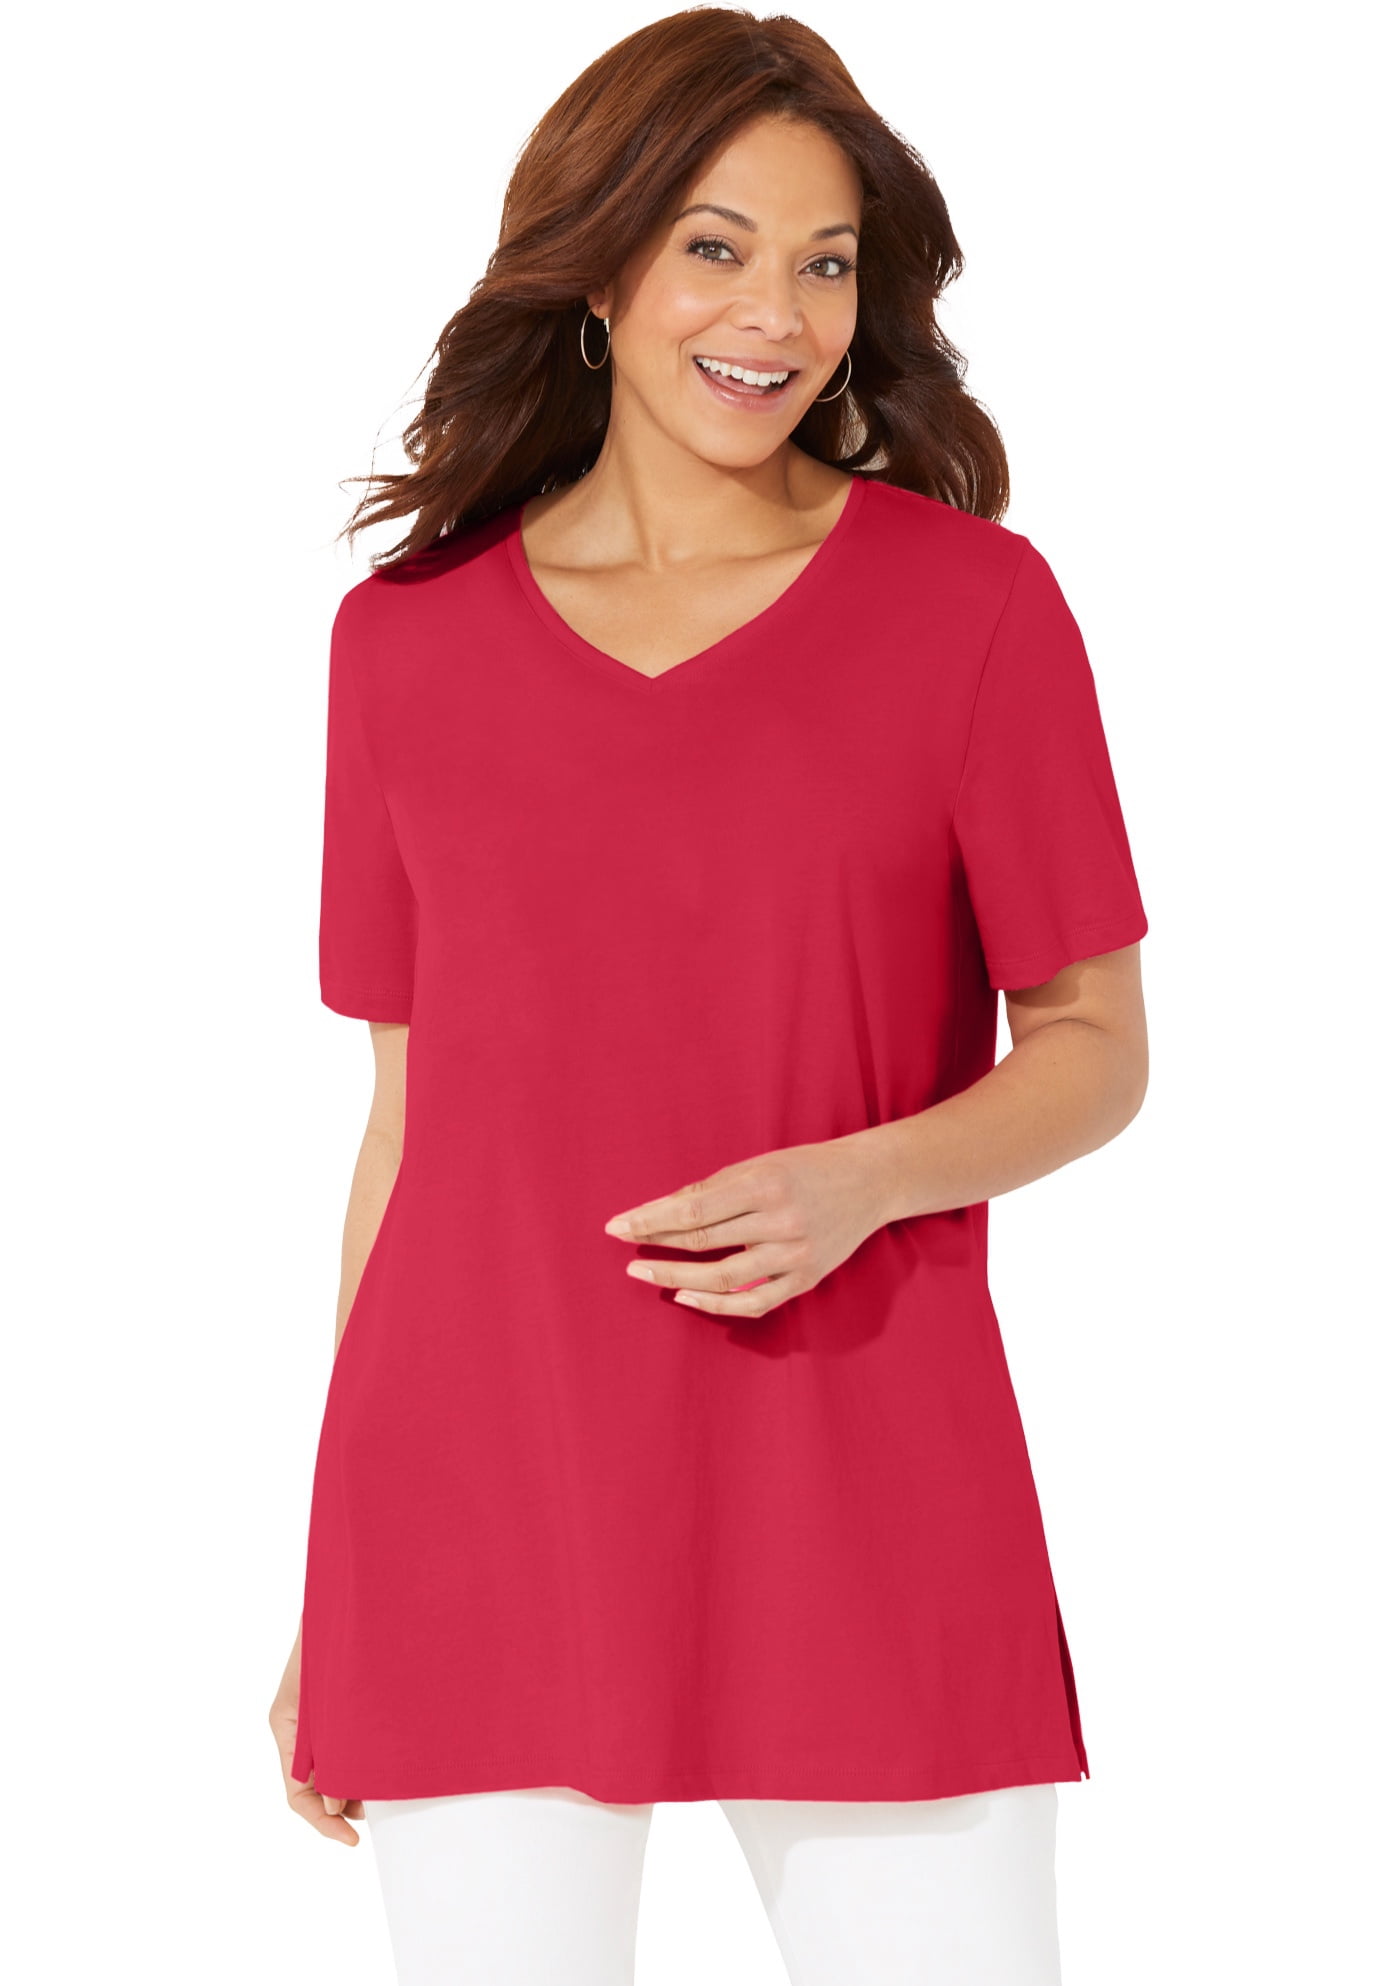 Catherines - Catherines Women's Plus Size Petite V-Neck Easy Fit Tee ...